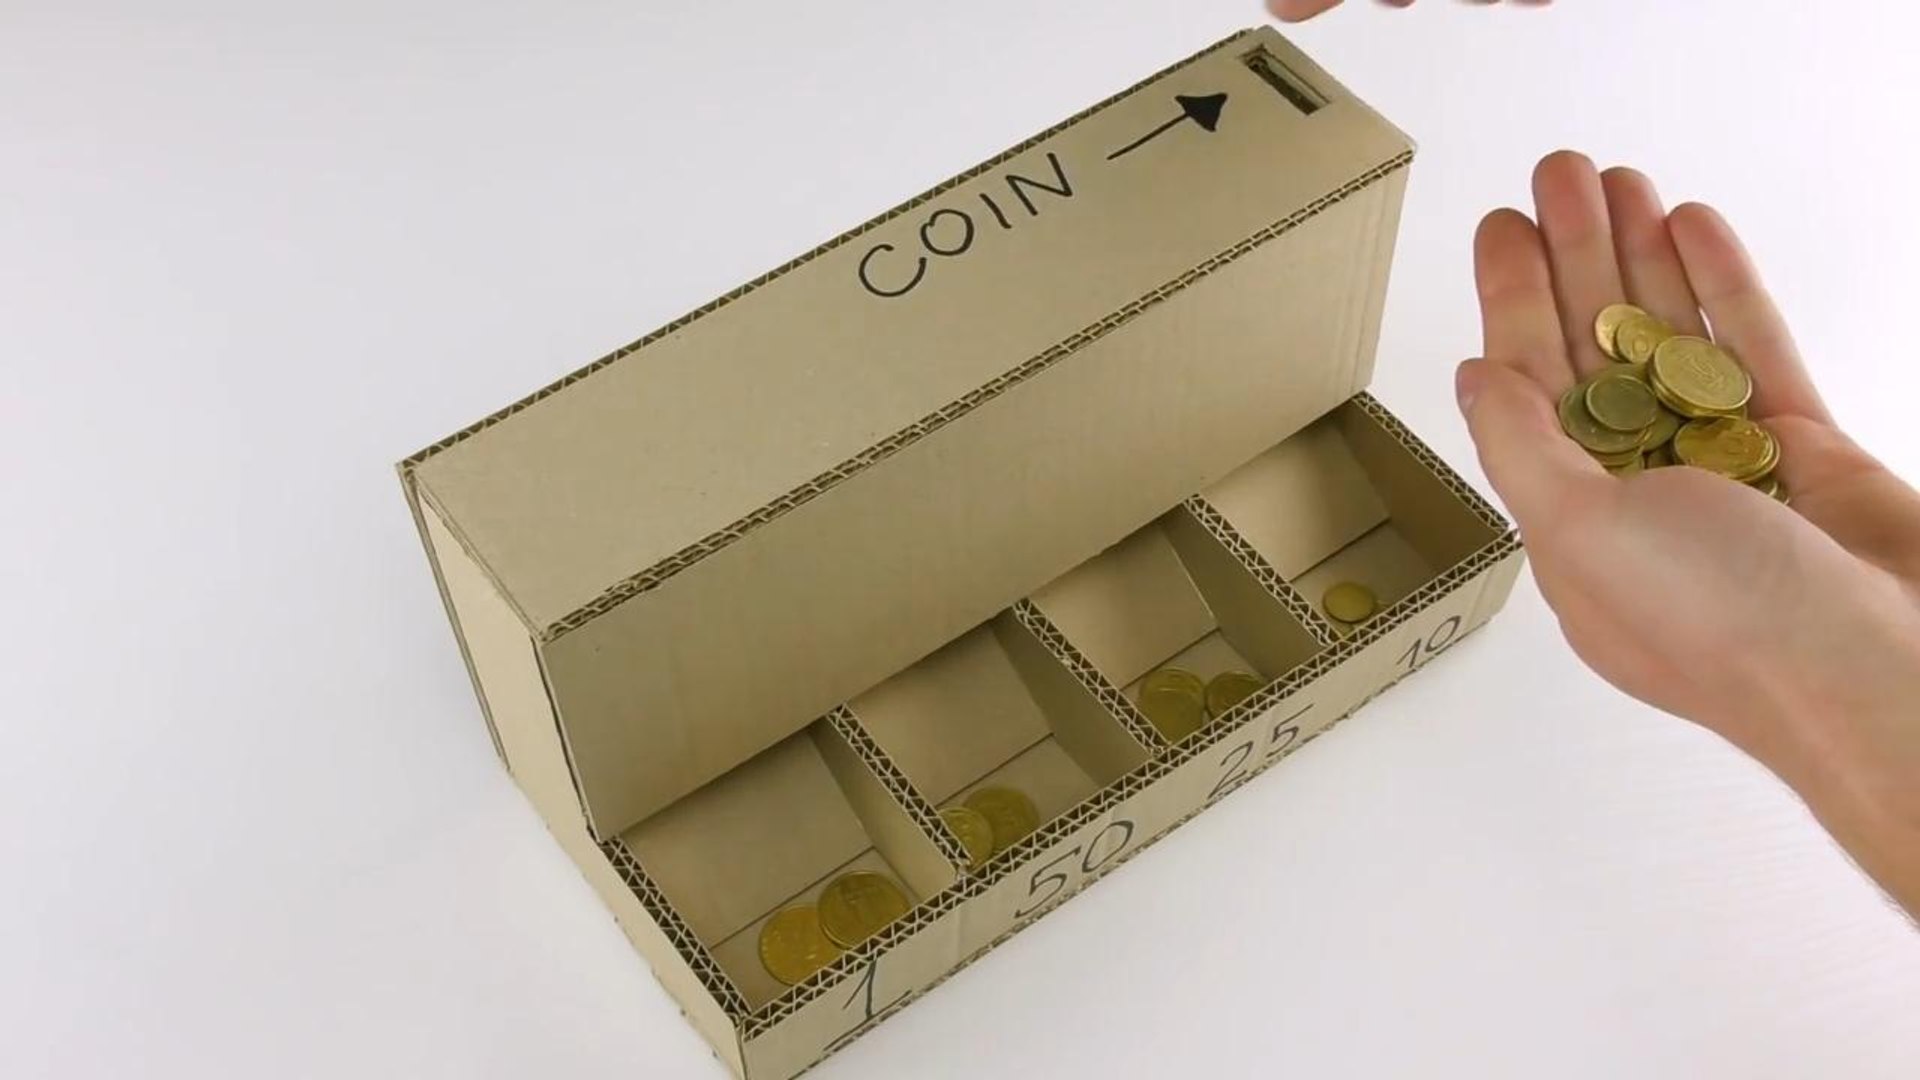 DIY Automatic Coin Sorting Machine from Cardboard v2.0 